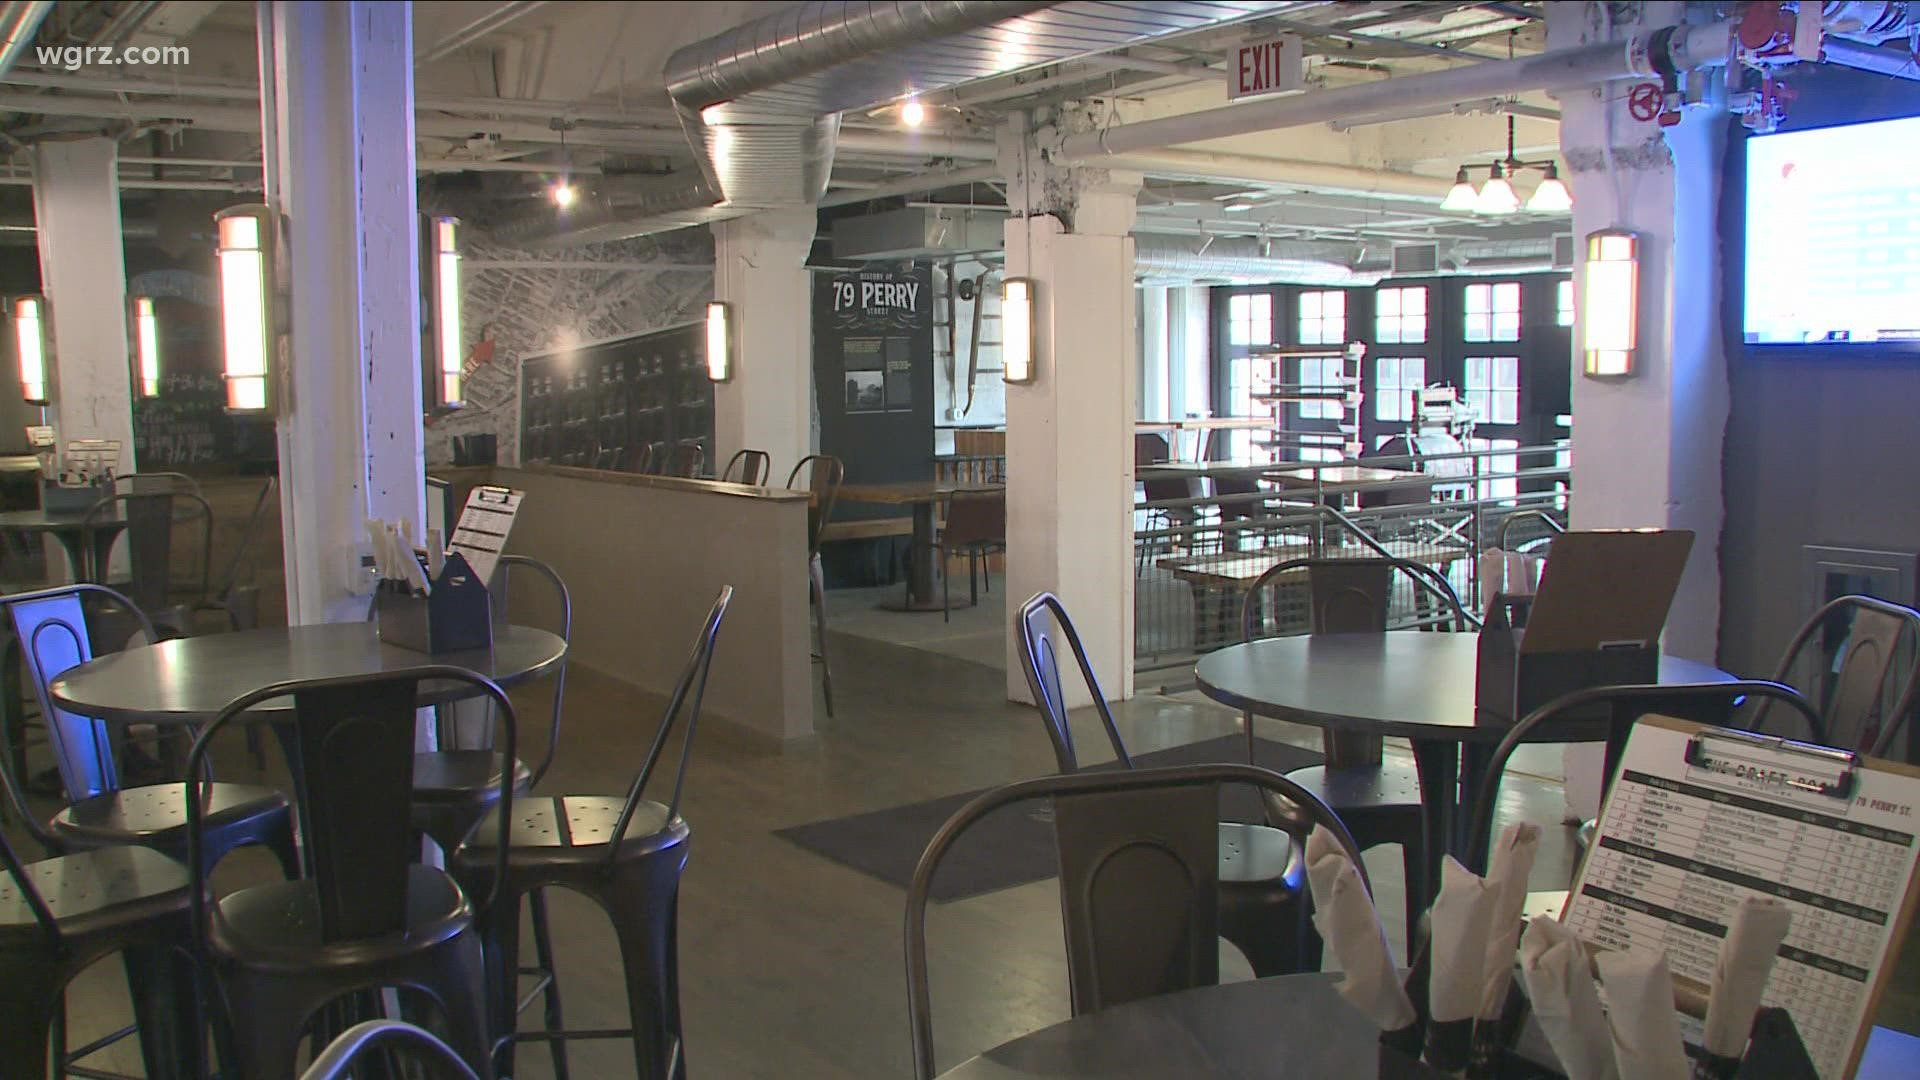 The Draft Room bar opened its doors once again to customers.